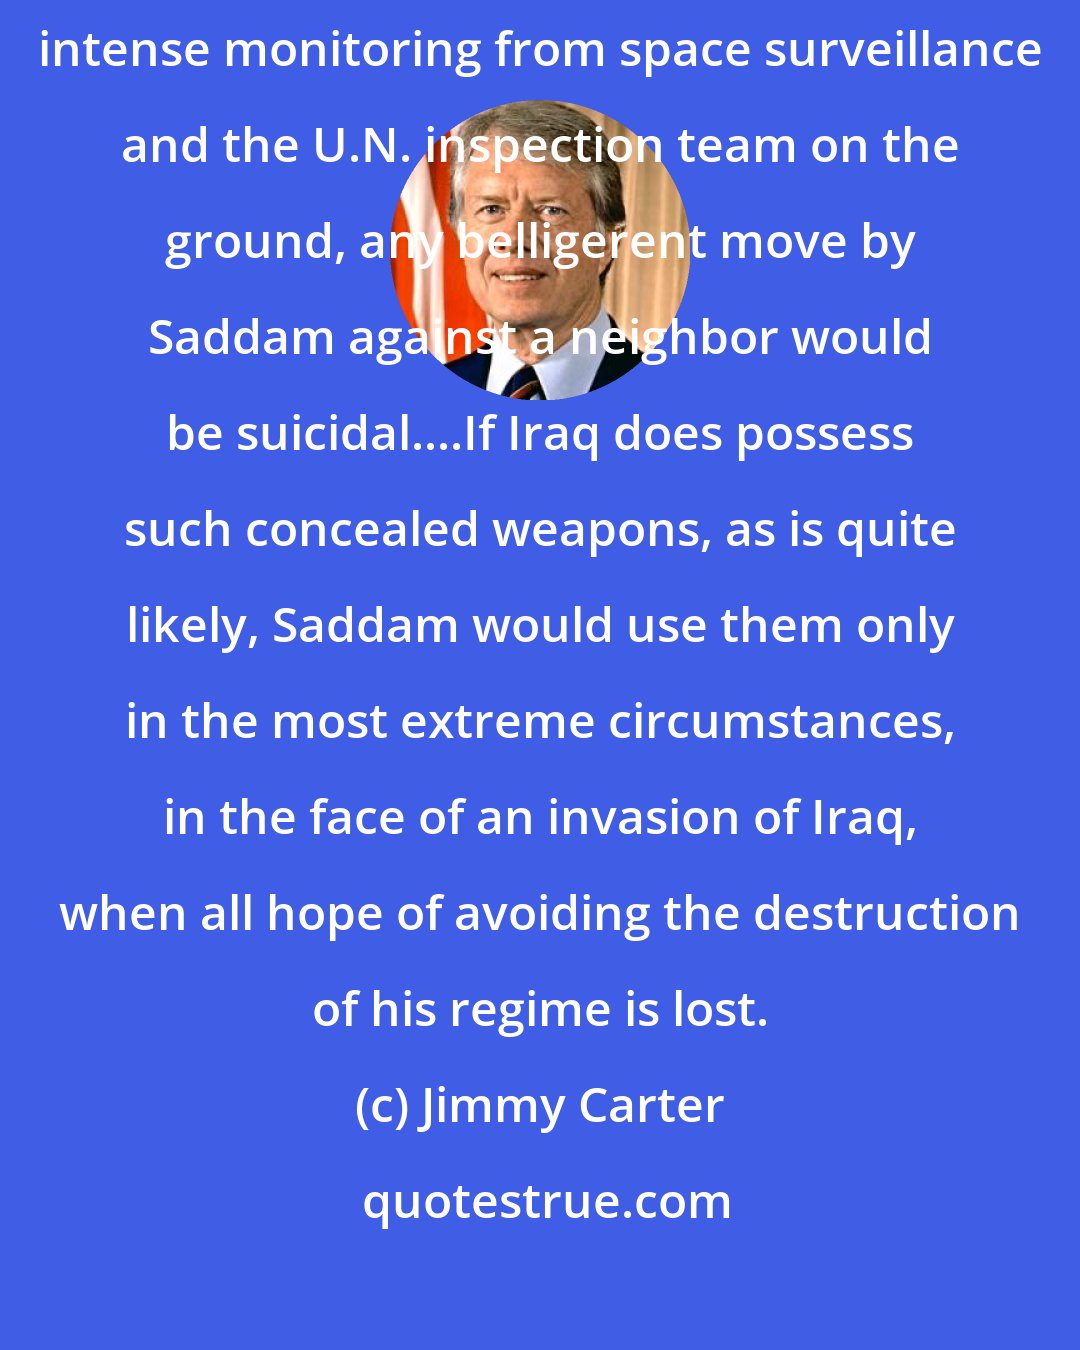 Jimmy Carter: With overwhelming military strength now deployed against him and with intense monitoring from space surveillance and the U.N. inspection team on the ground, any belligerent move by Saddam against a neighbor would be suicidal....If Iraq does possess such concealed weapons, as is quite likely, Saddam would use them only in the most extreme circumstances, in the face of an invasion of Iraq, when all hope of avoiding the destruction of his regime is lost.